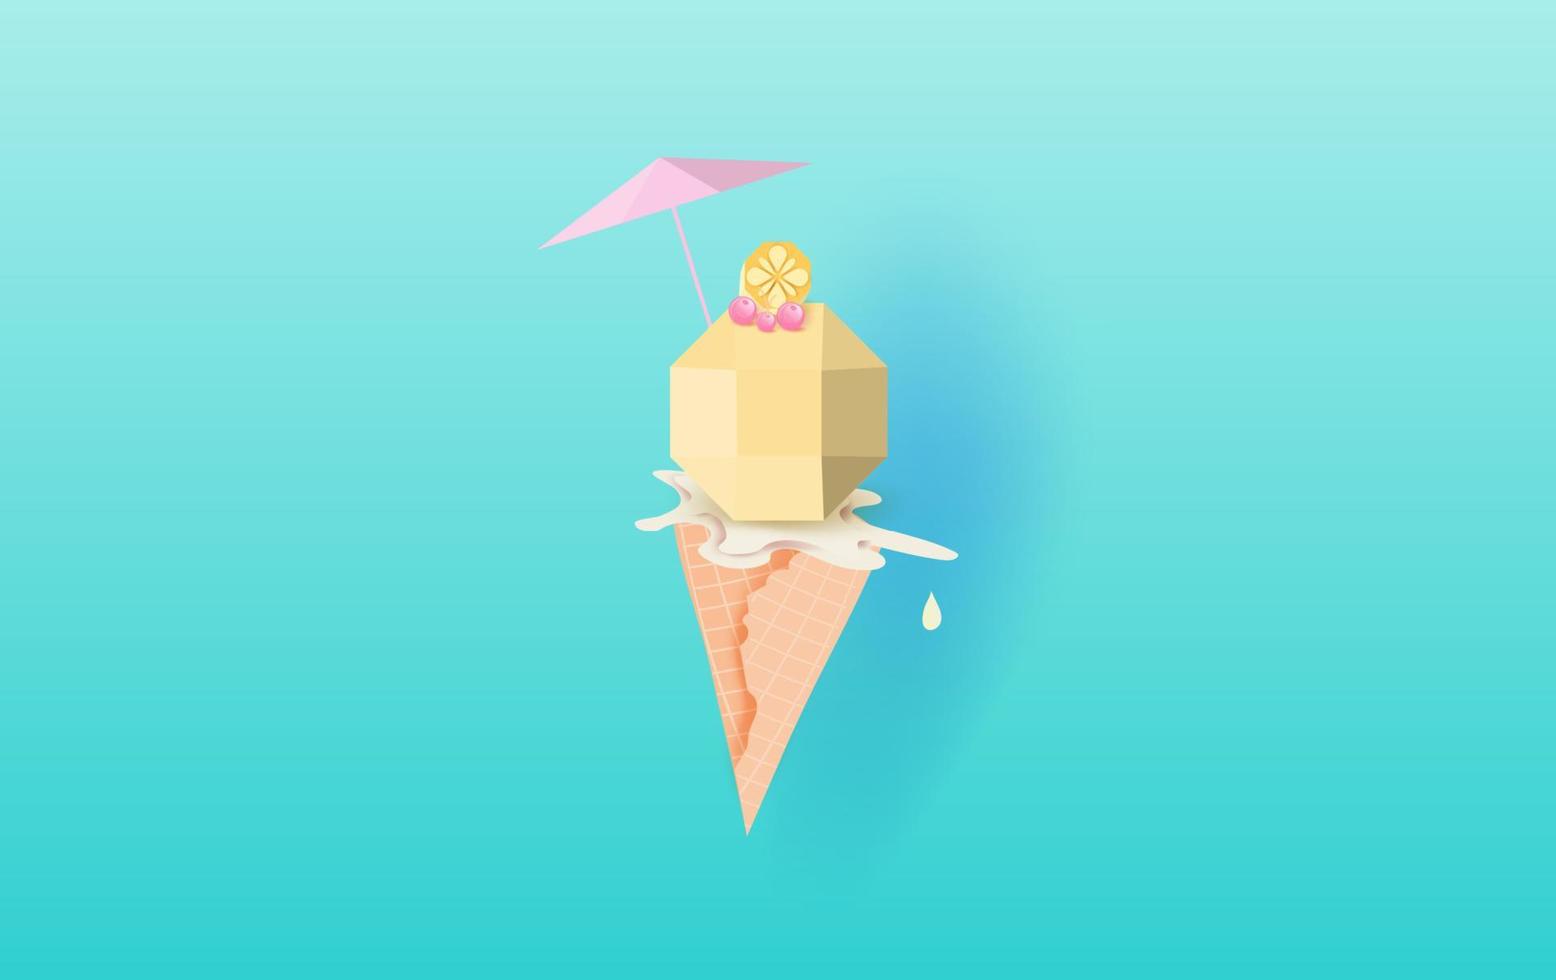 3D Paper art of  Ice cream  with cherry and lemon on the top vanilla cone melting on blue background.Vanilla Cream Melted in Wafer Background .Colorful pop of card or poster.summer season vector